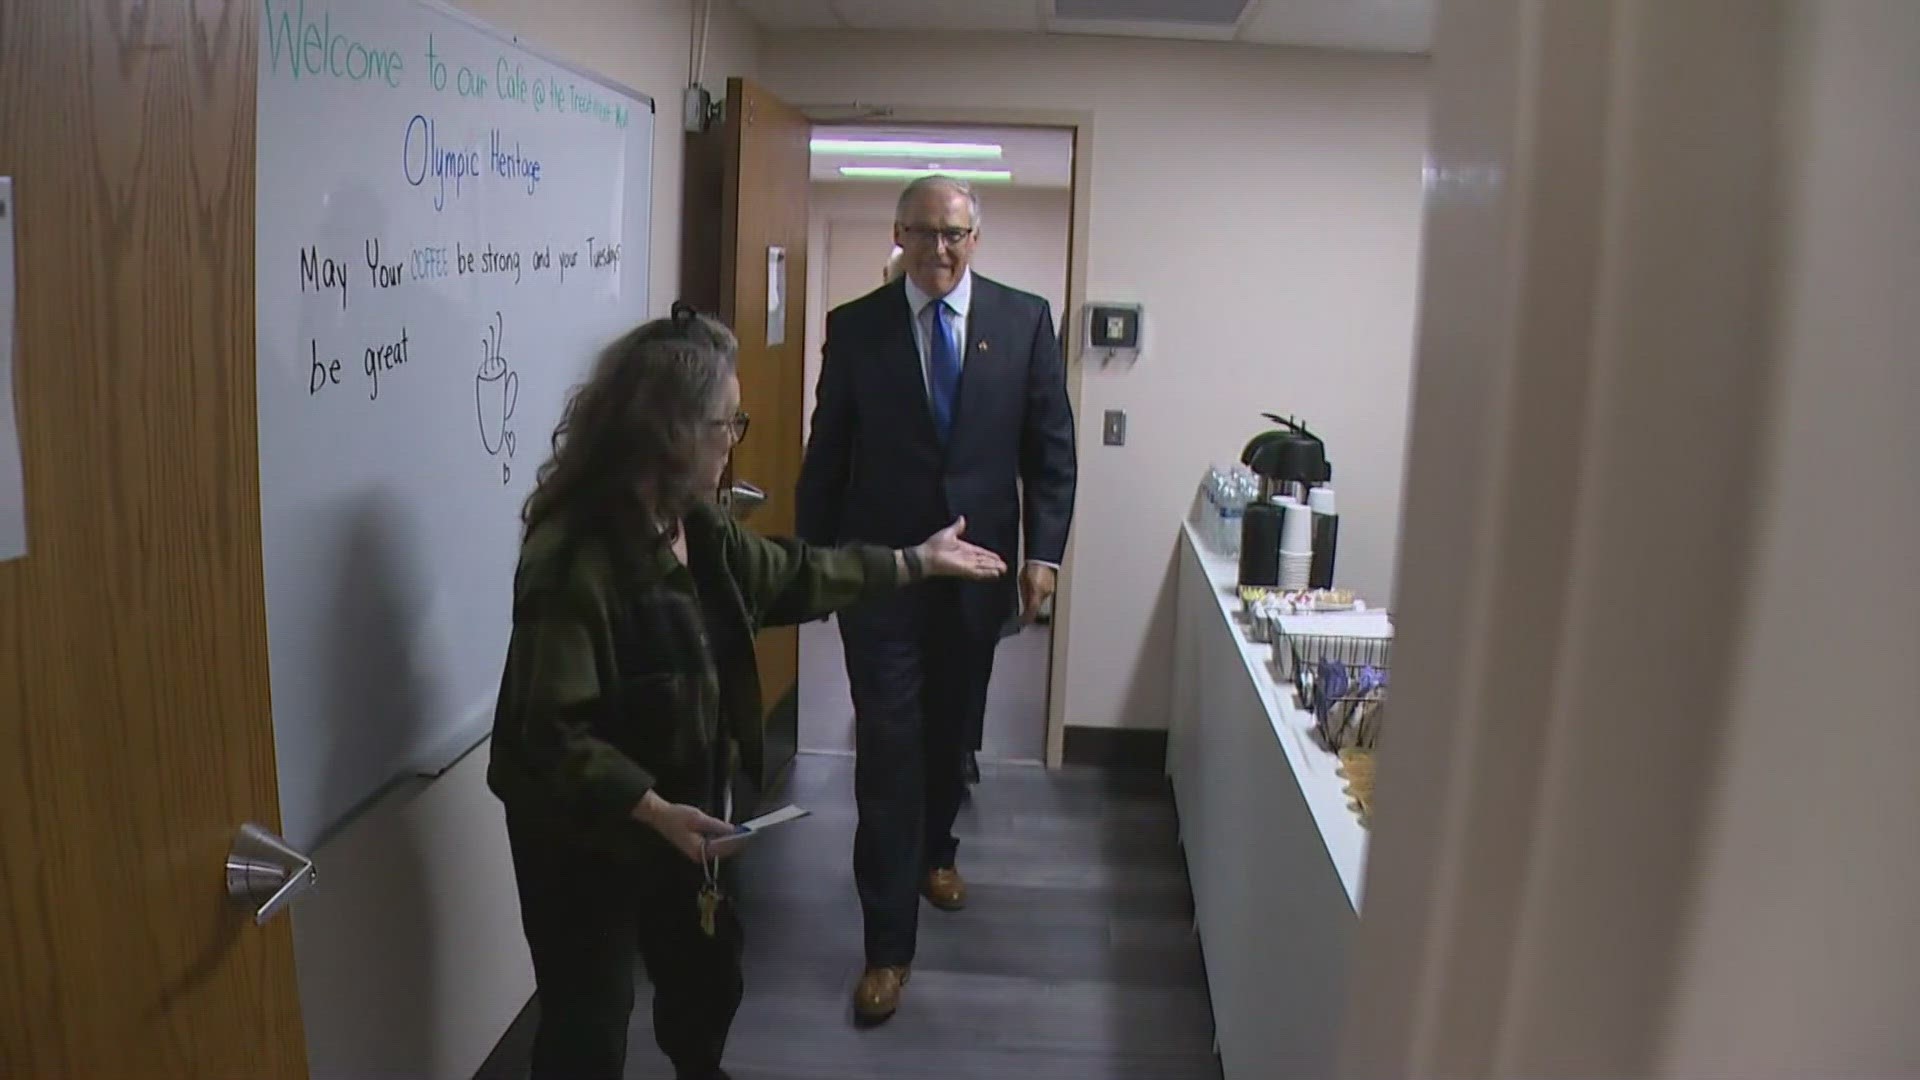 Olympic Heritage Behavioral Health offers 137 beds for people seeking behavioral health treatment. Gov. Jay Inslee visited the site for its ribbon cutting ceremony.